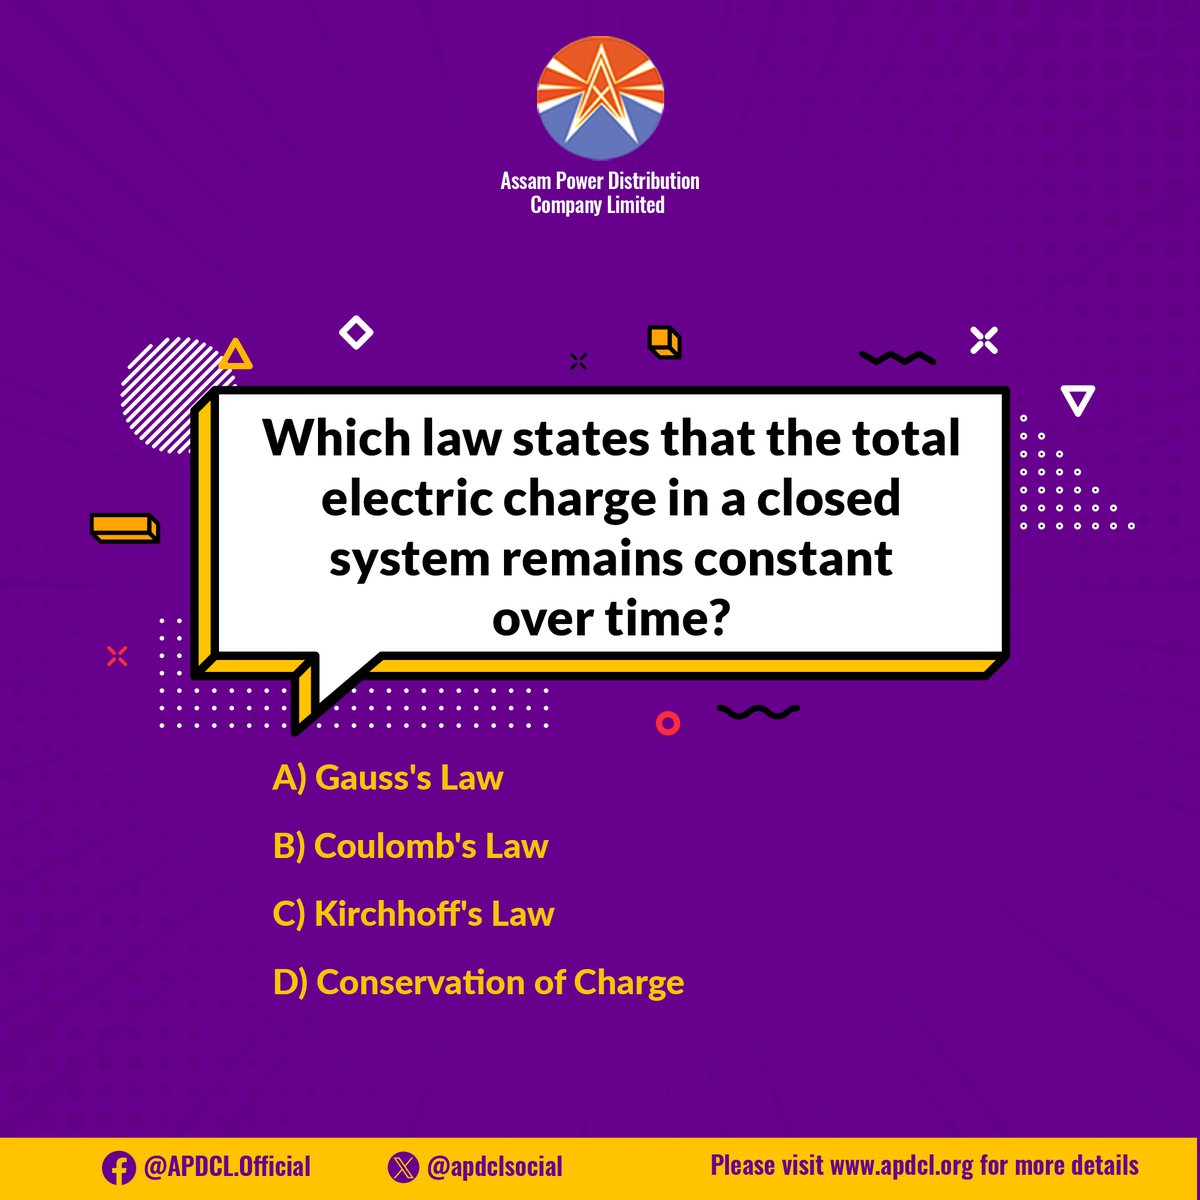 Can you identify the correct answer from the options given below? #TuesdayTrivia #Quiz #Brainstorm